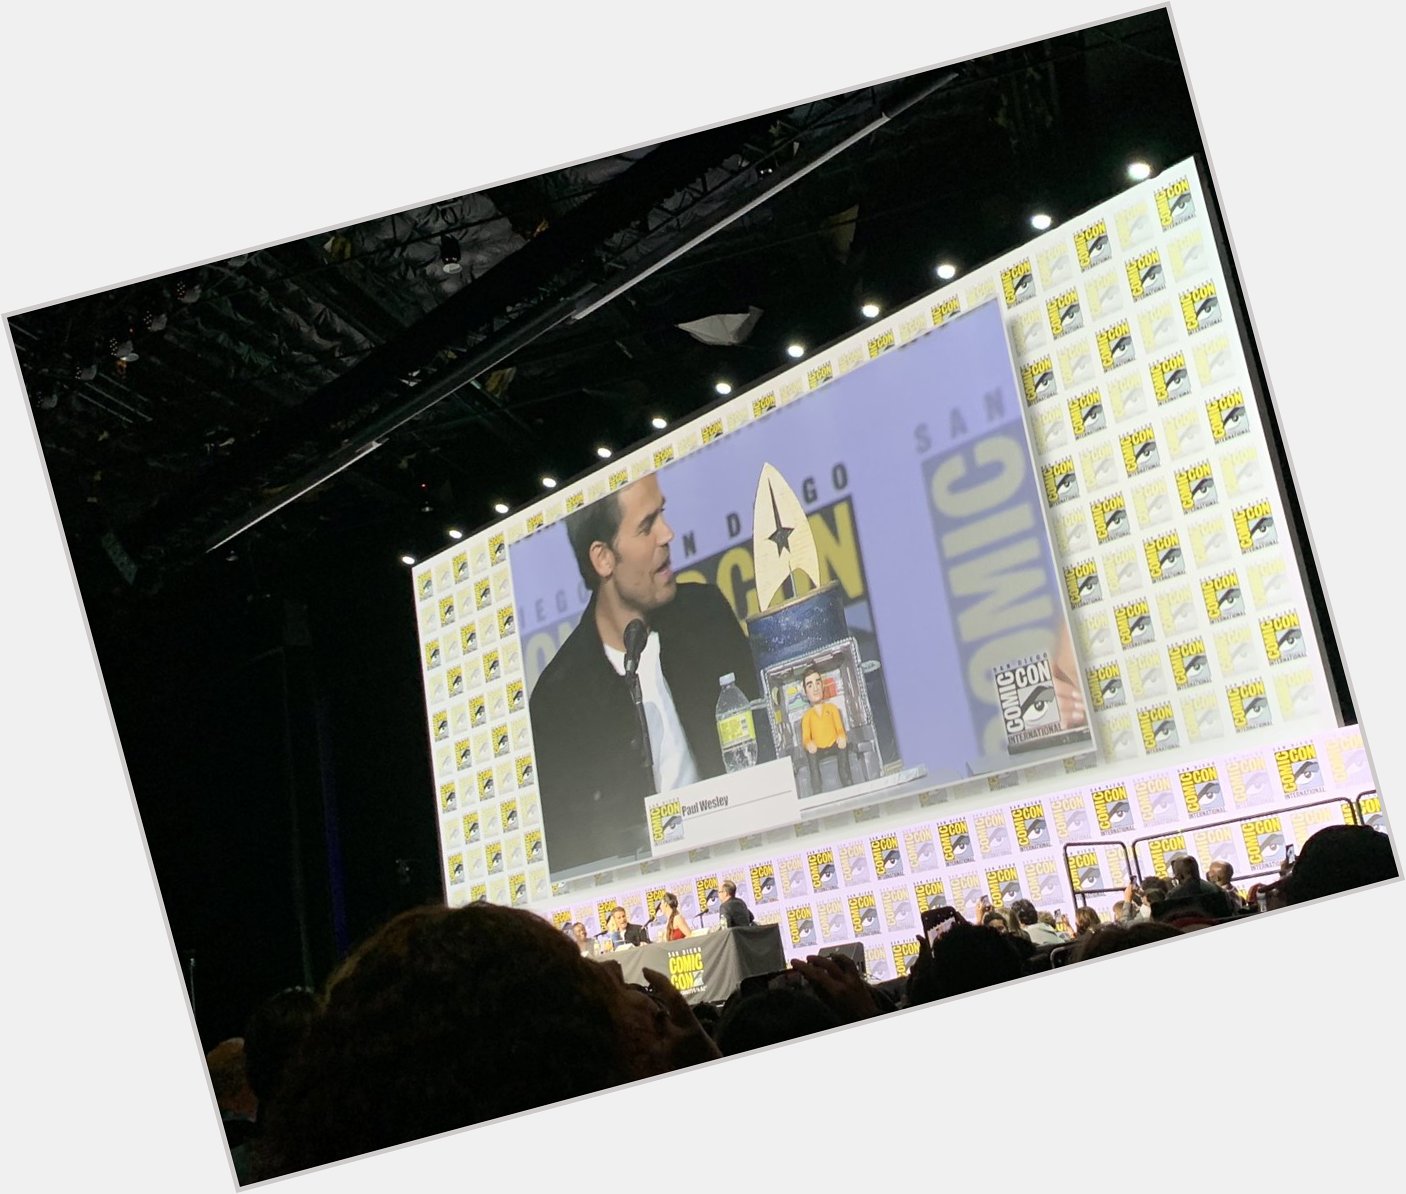 New Kirk Paul Wesley surprised with a birthday cake and a rendition of Happy Birthday from Hall H 